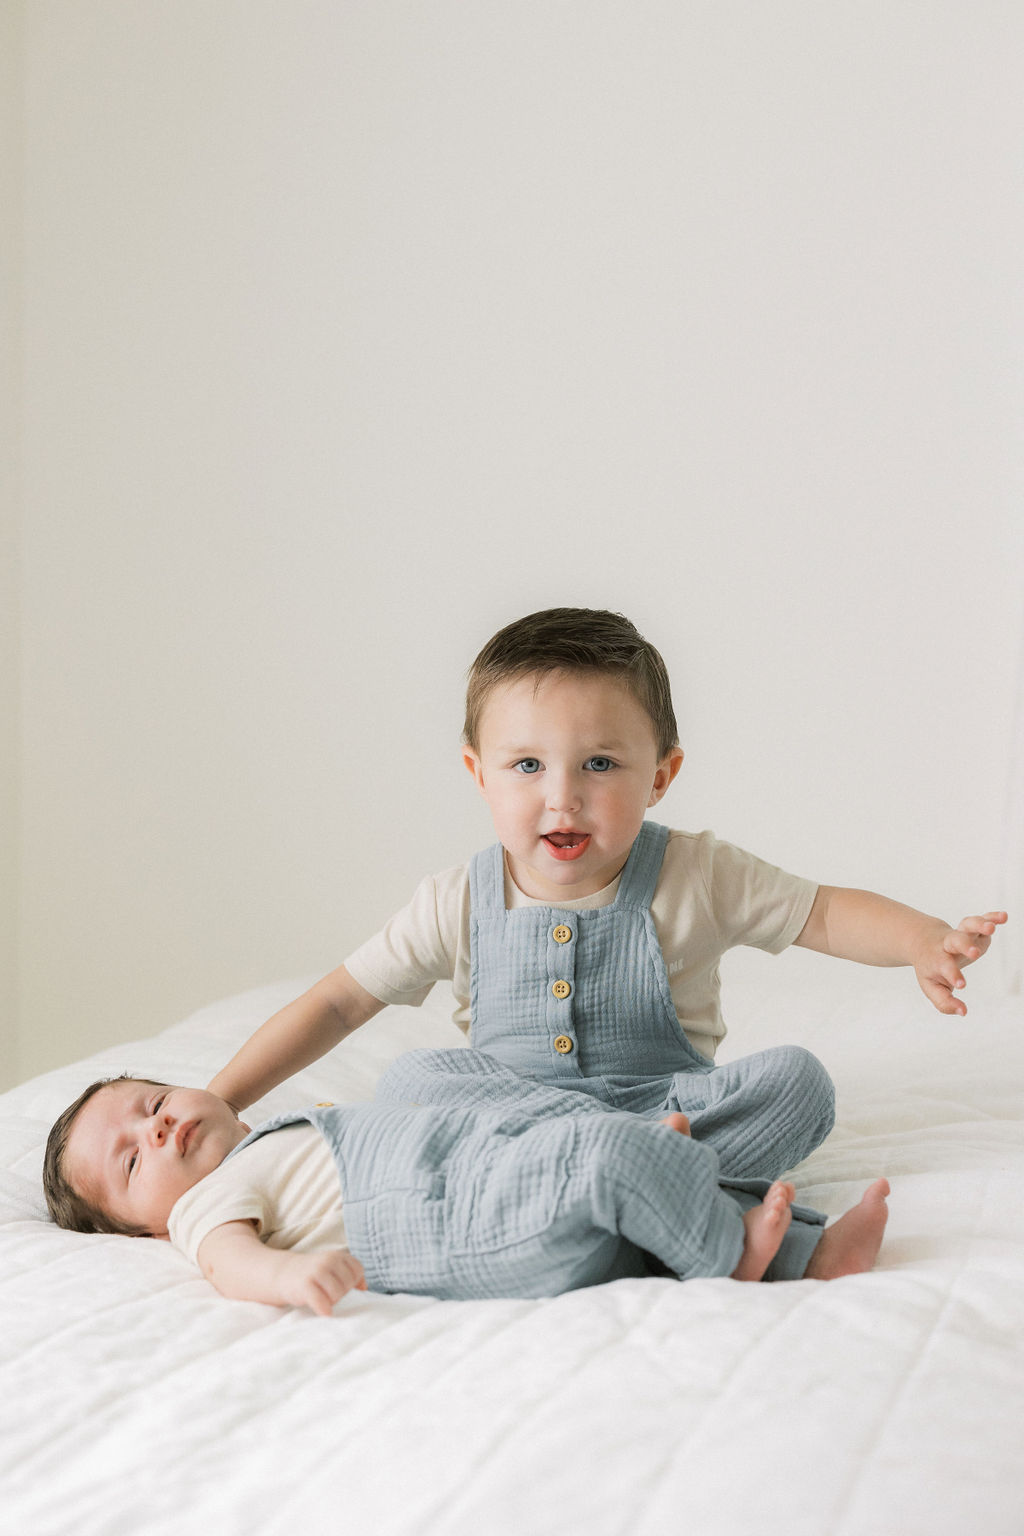 A toddler boy in blue overalls sits on a bed with his newborn baby brother laying in front of him